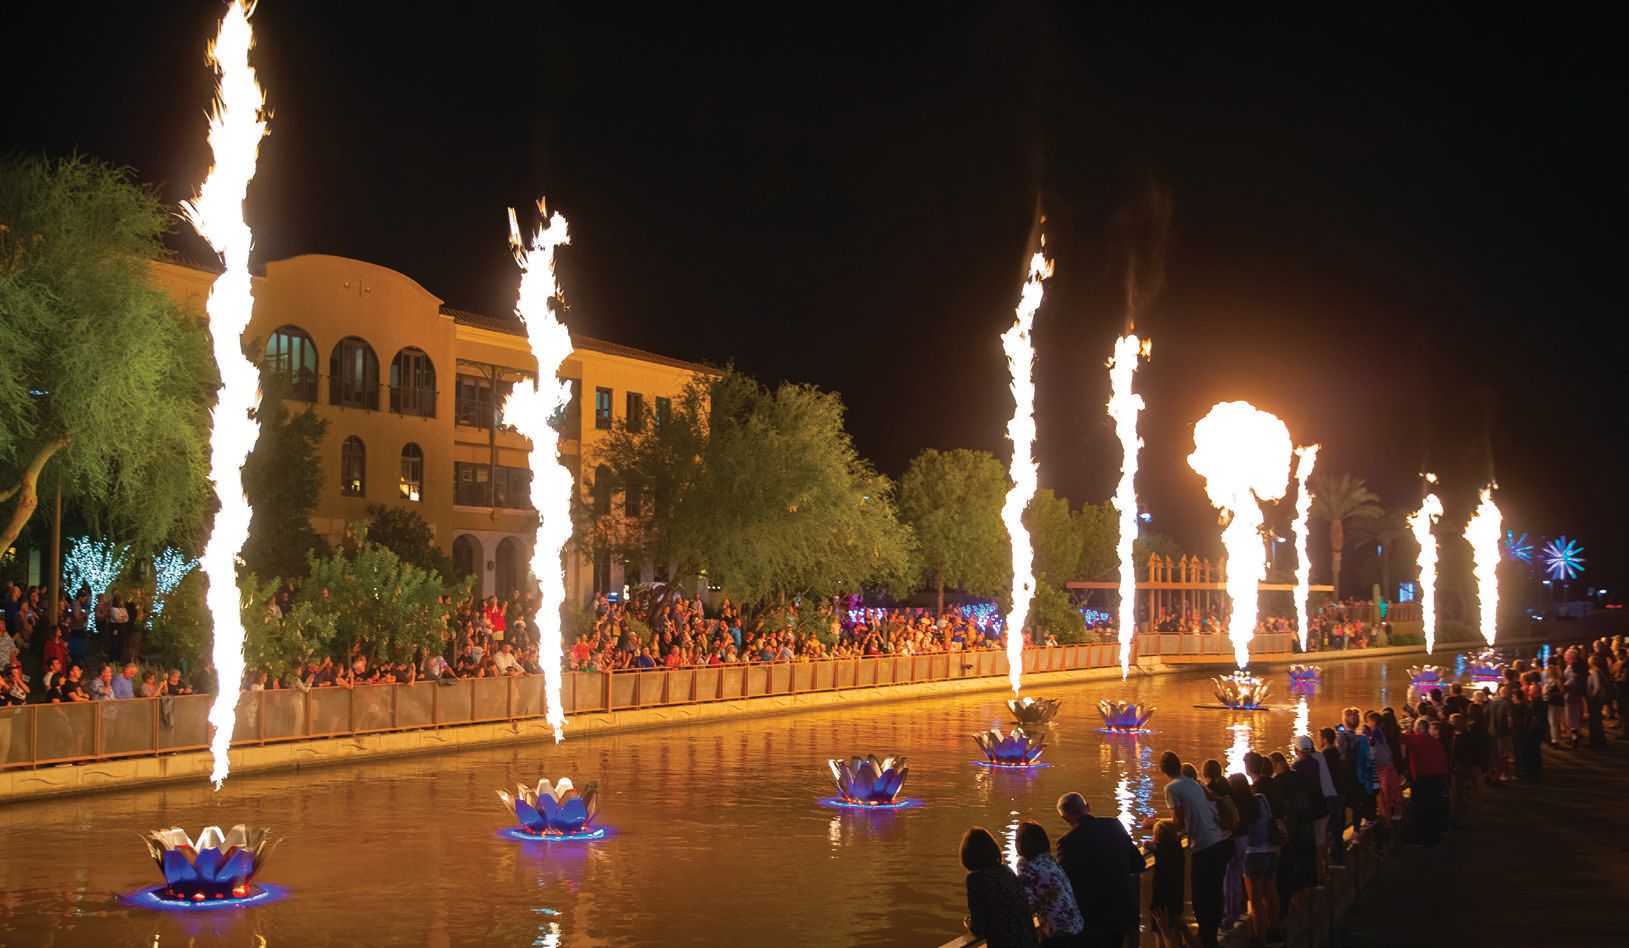 Walter Productions creates artwork-based fire shows each year at the event, like this 2021 installation titled “Floom”; PHOTO BY CHRIS LOOMIS